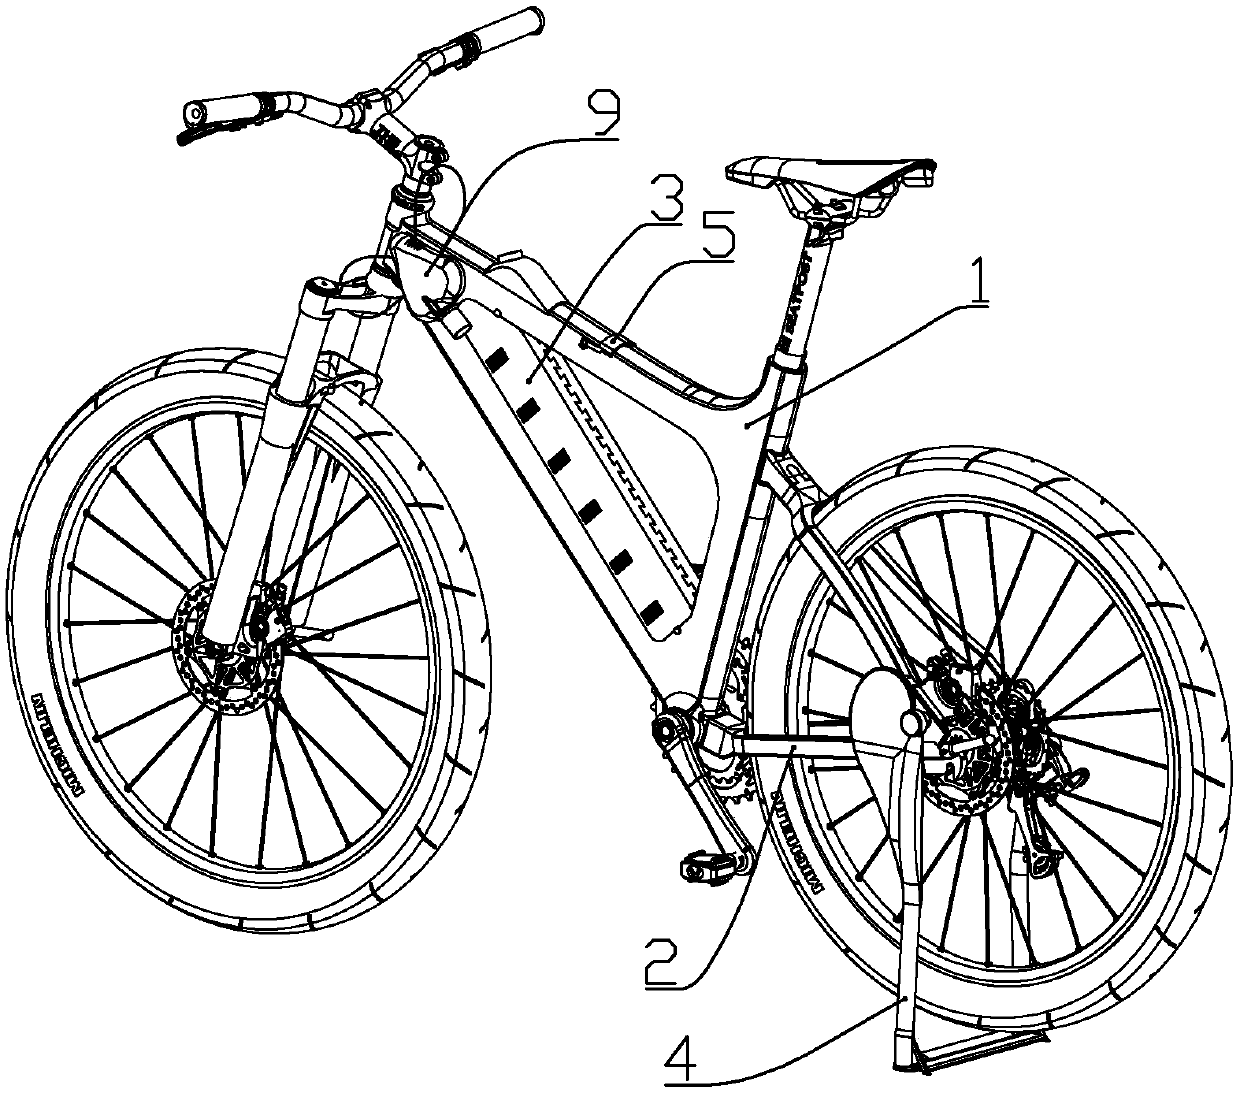 A shared bicycle for quick return